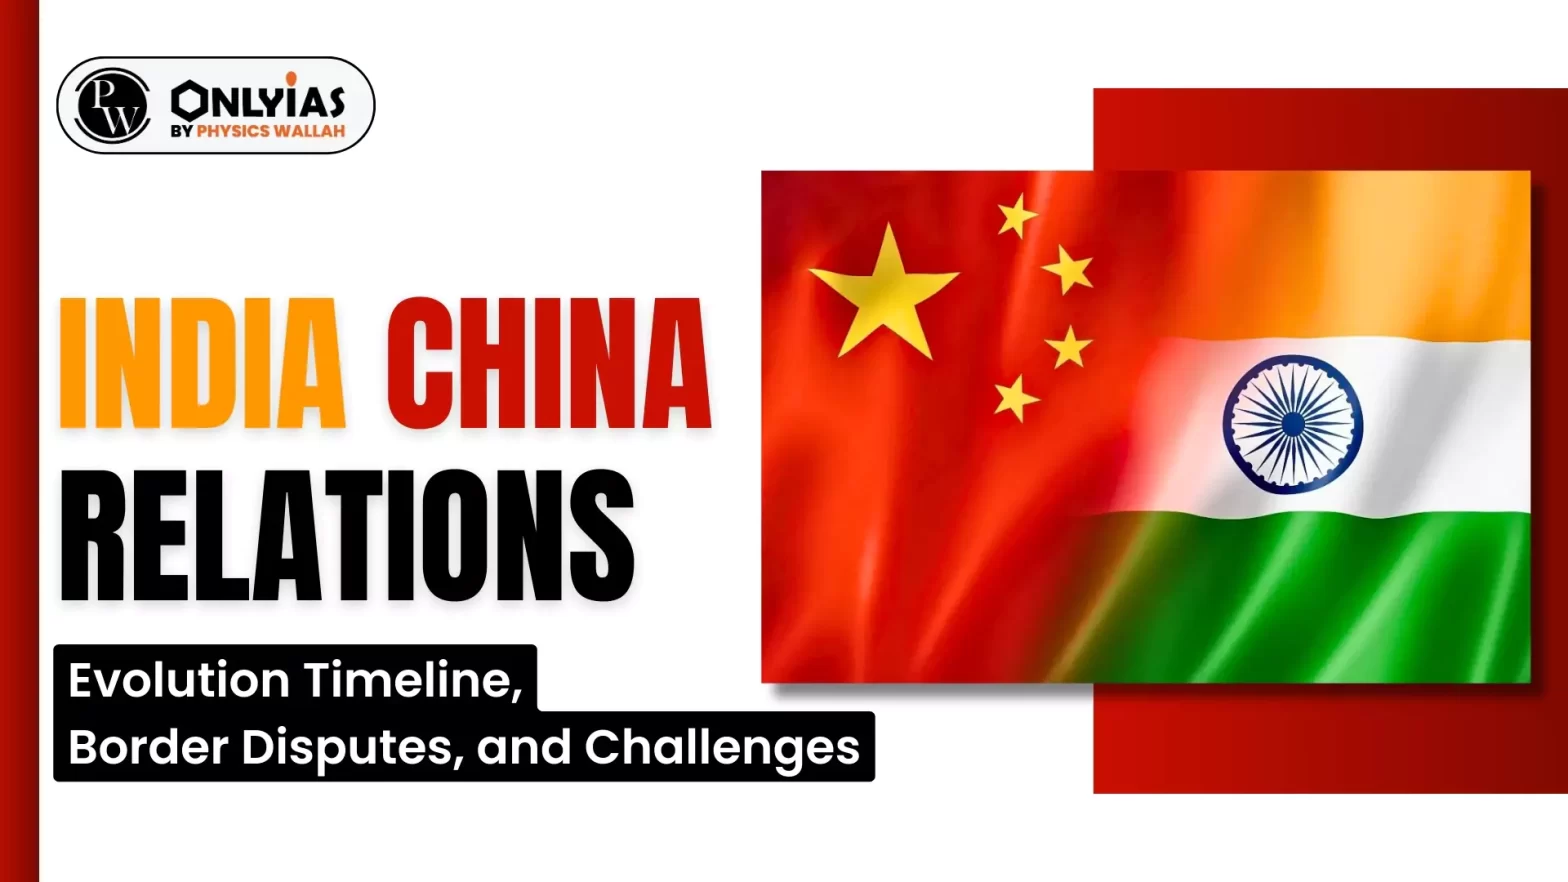 India China Relations: Evolution Timeline, Border Disputes, and Challenges